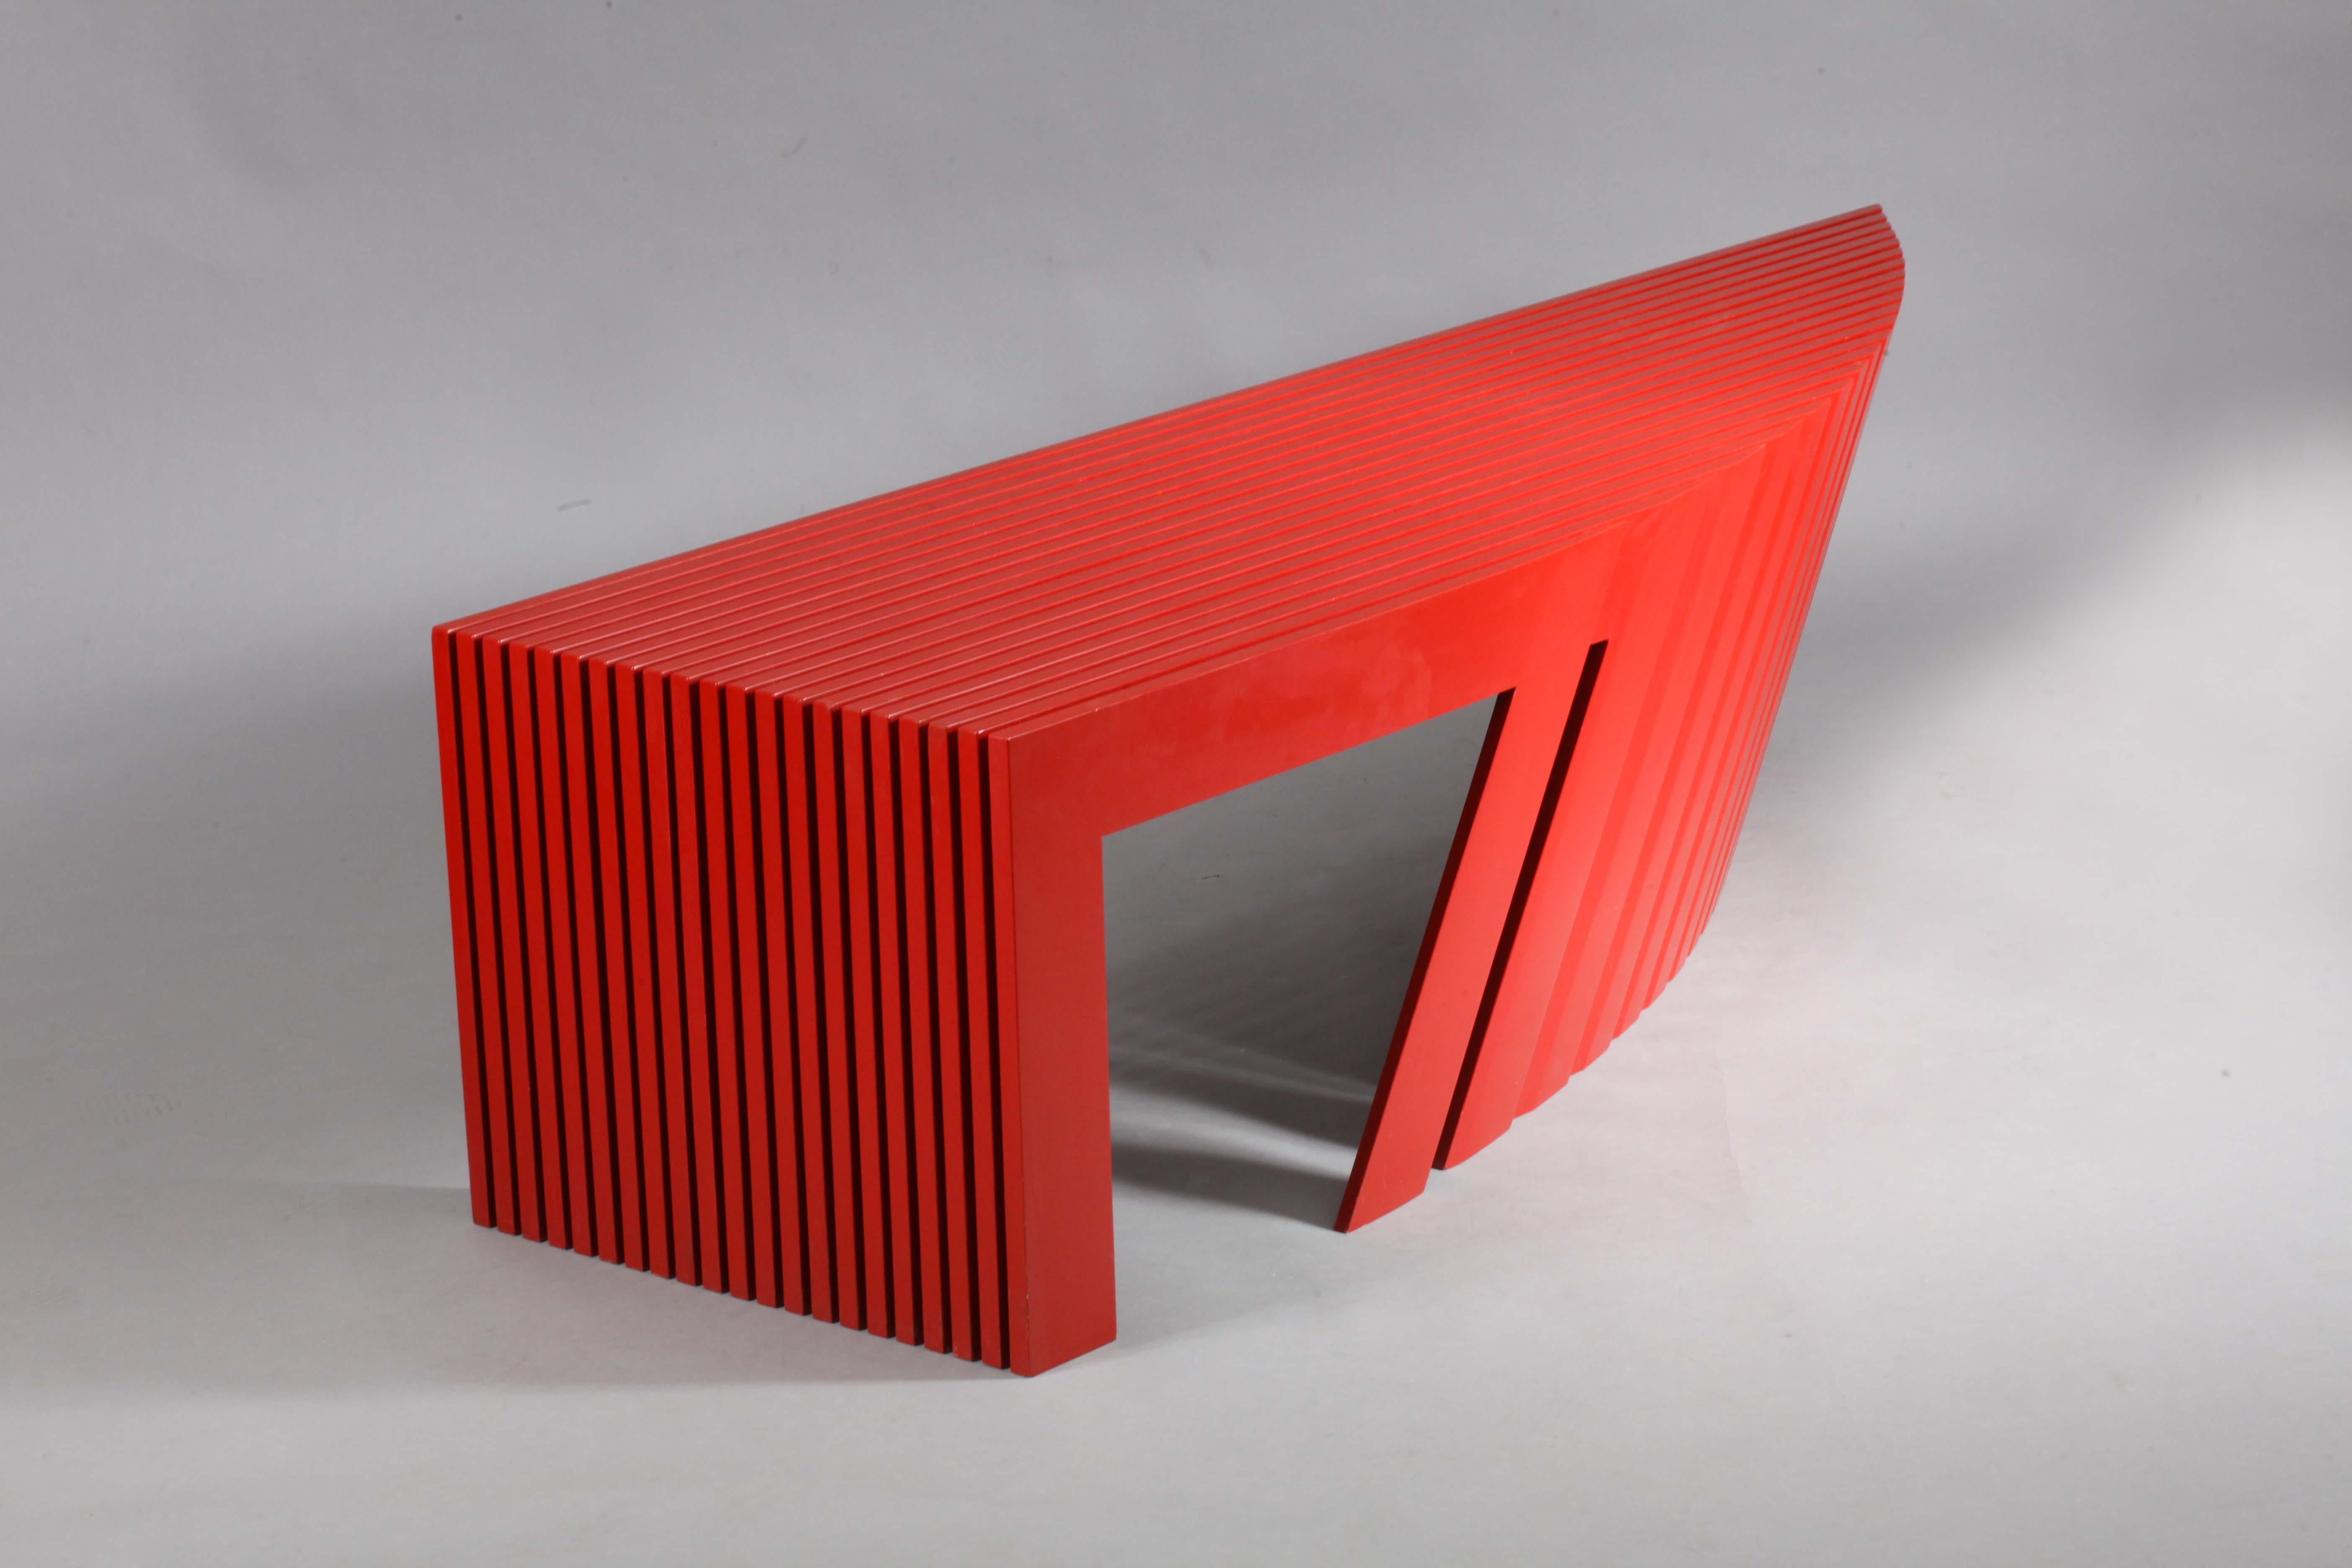 Big Postmodern architectural coffeetable
Arch. Wieser
Architect Wieser made is adjucation by Viennese Professor Roland Rainer in Vienna, 1970.
Vienna, 1980
Red lacquered wood, chrome.